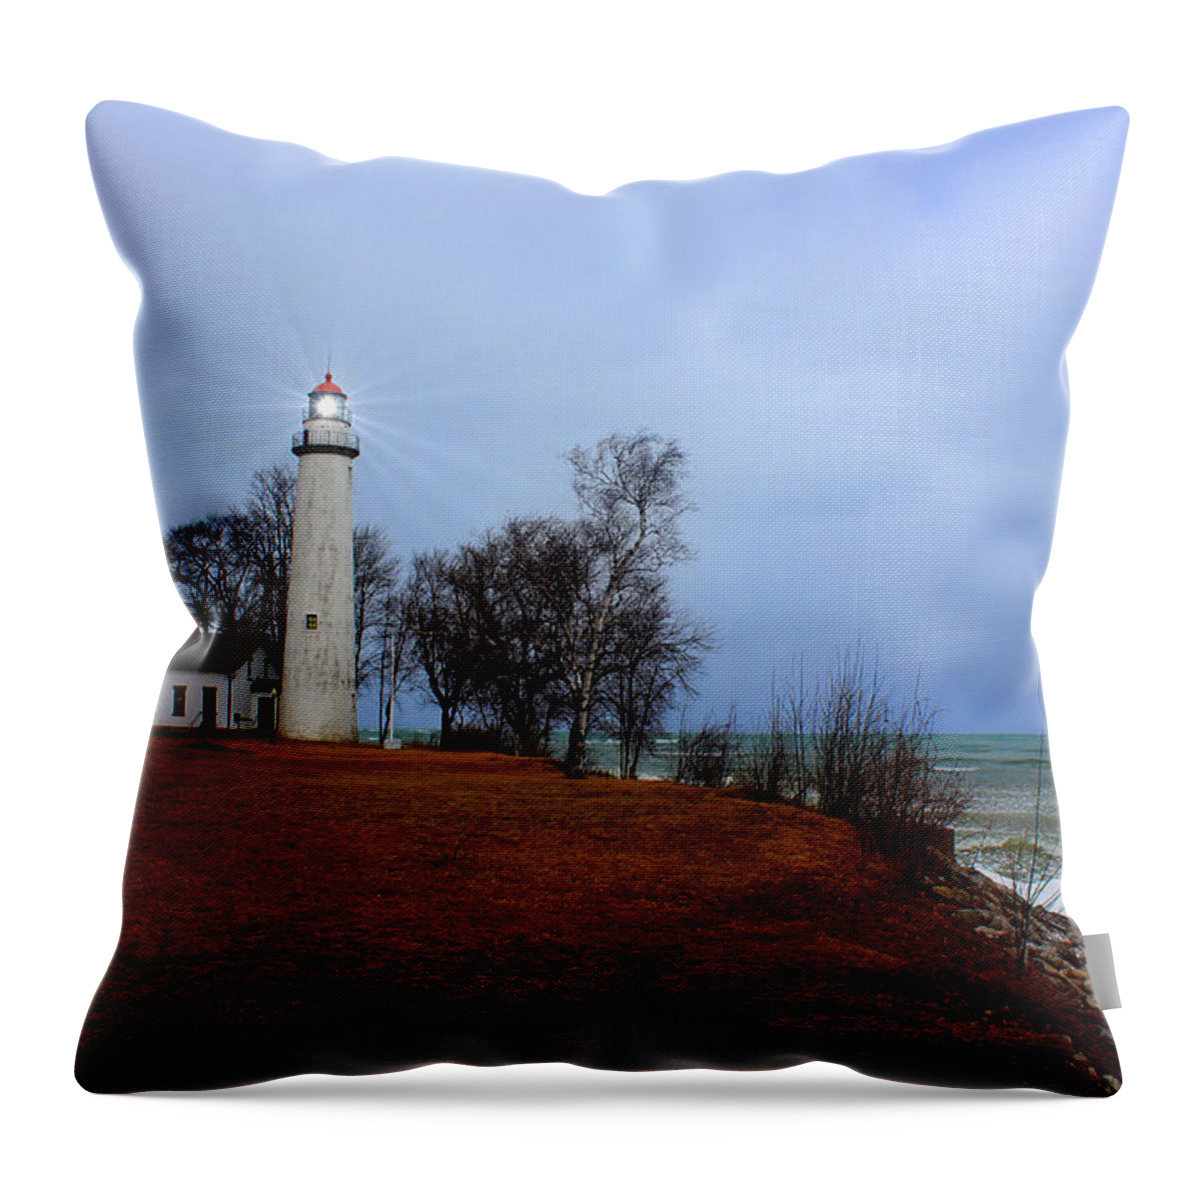 Lighthouse Throw Pillow featuring the photograph Pointe Aux Barques Lighthouse by Michael Rucker